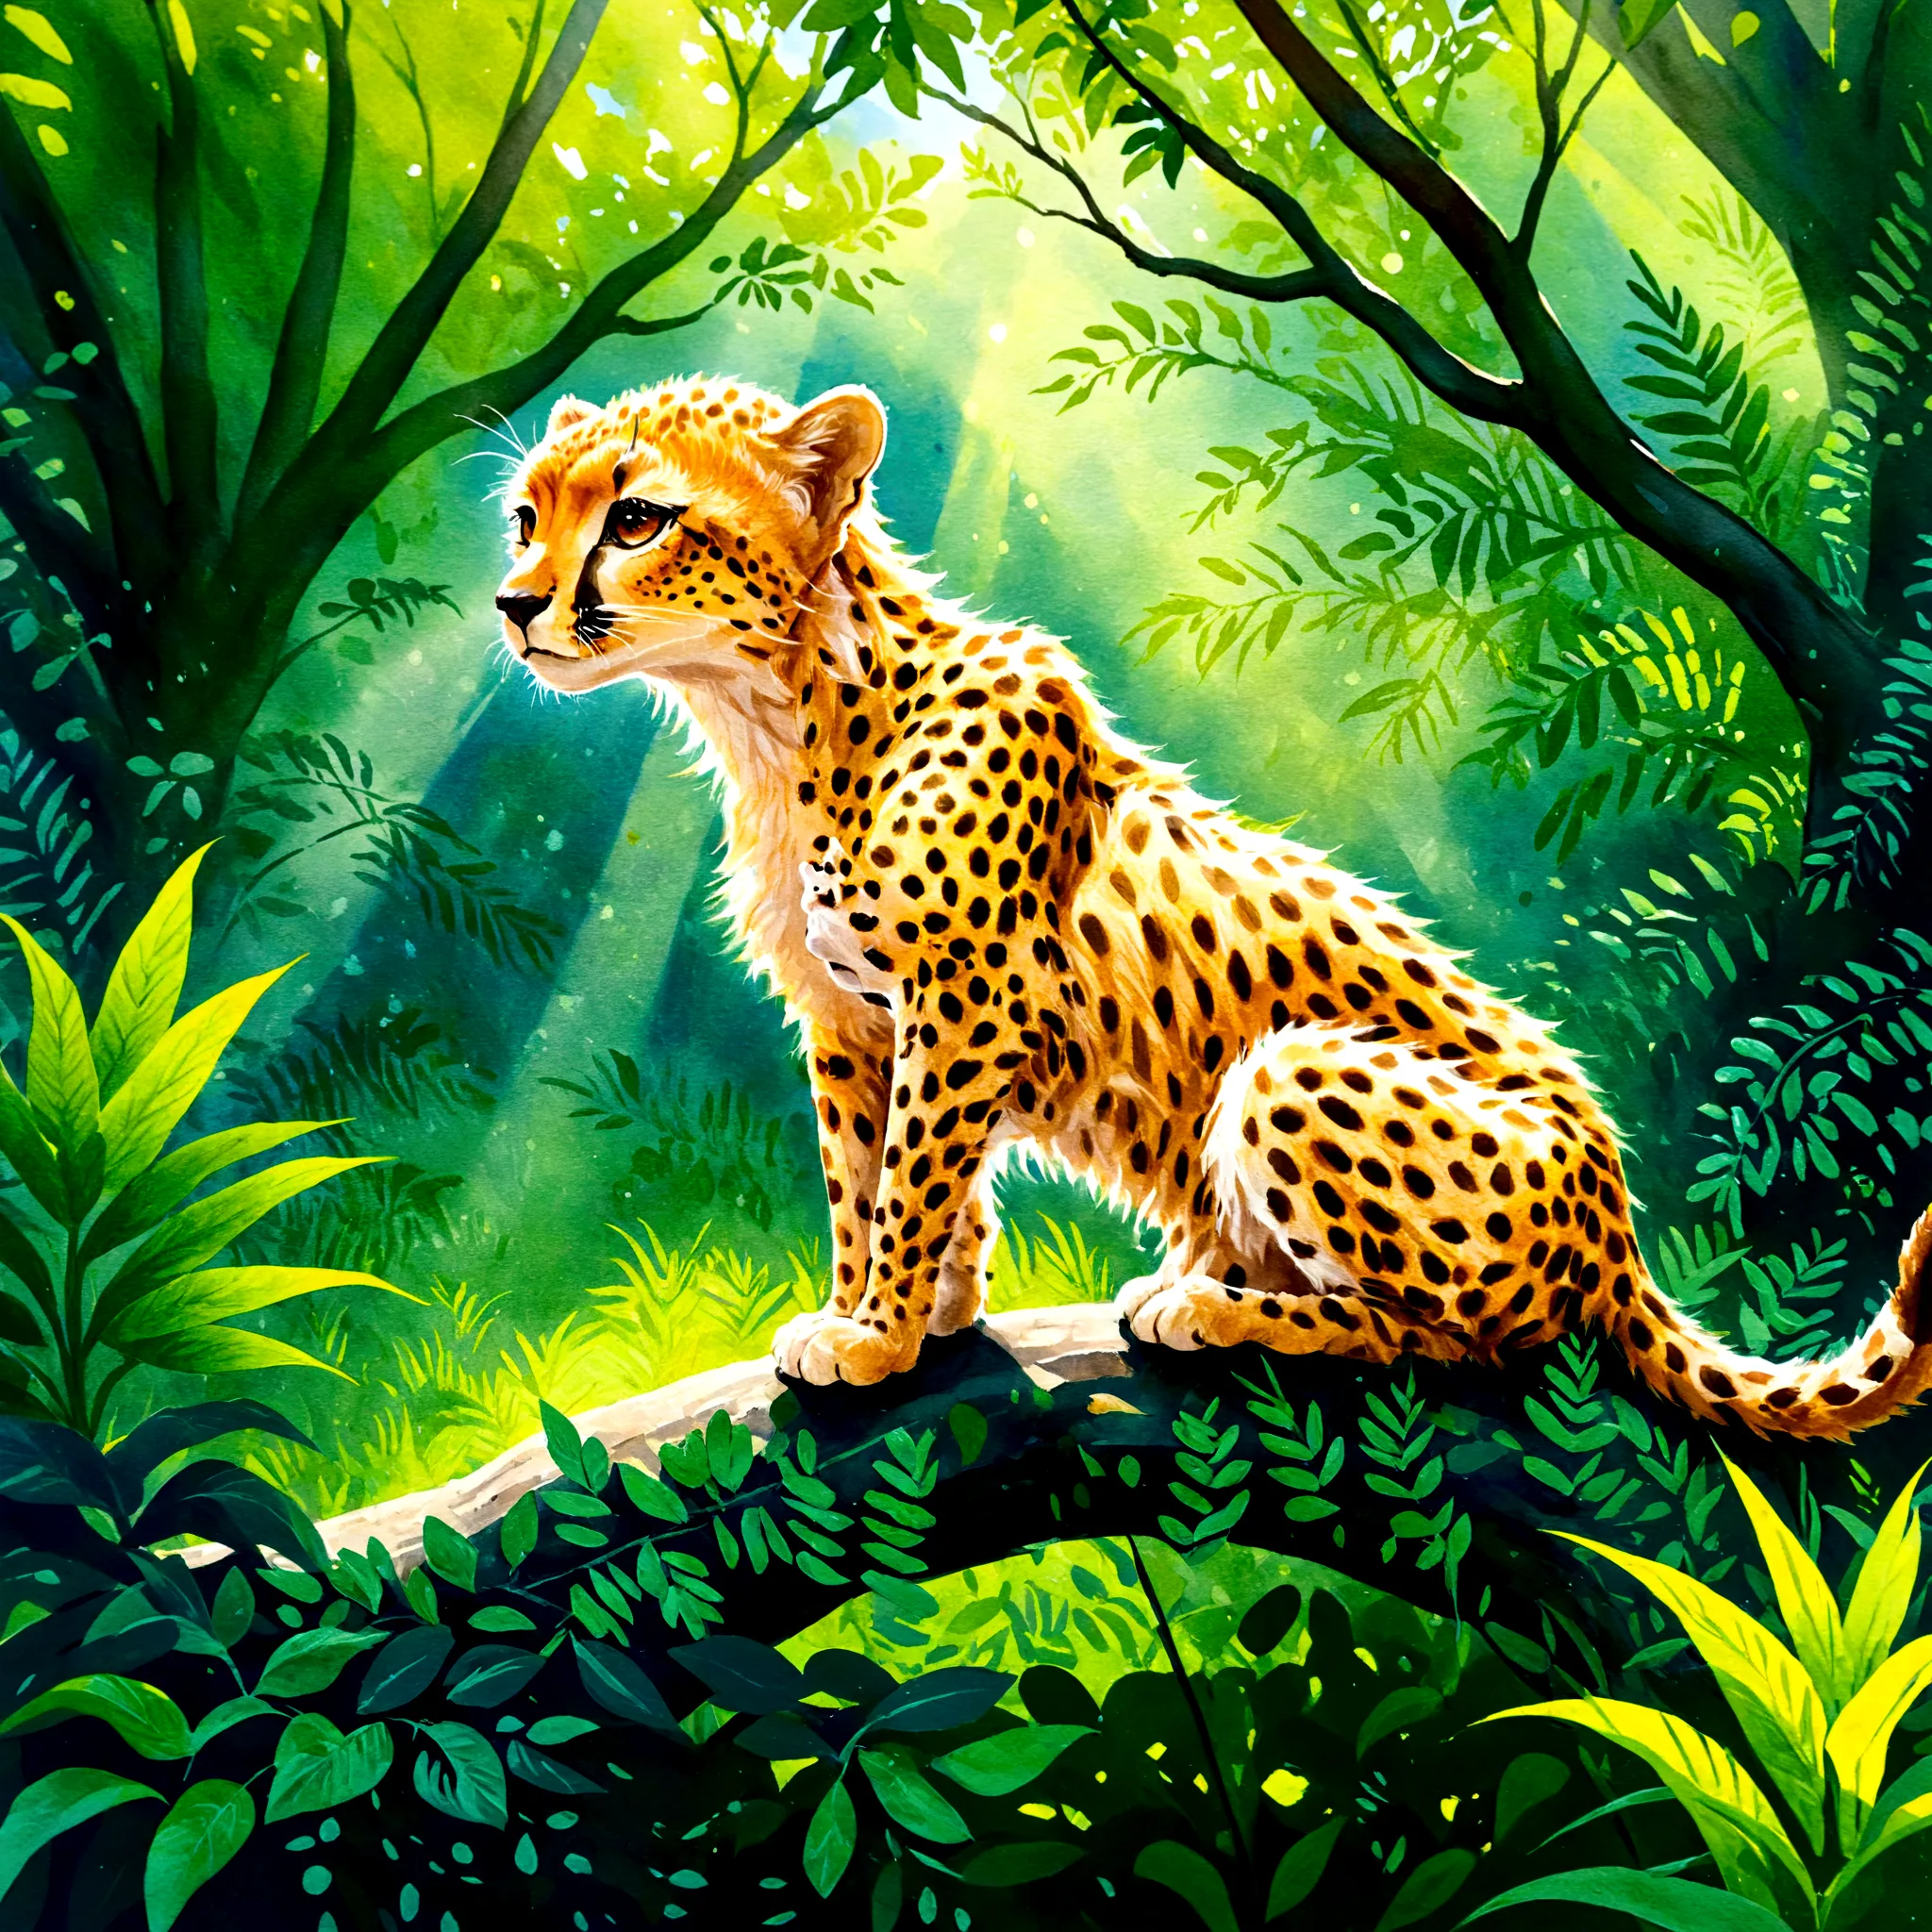 A watercolor painting of a cheetah cub climbing a tree, with sunlight filtering through the leaves and casting shadows on the cu...